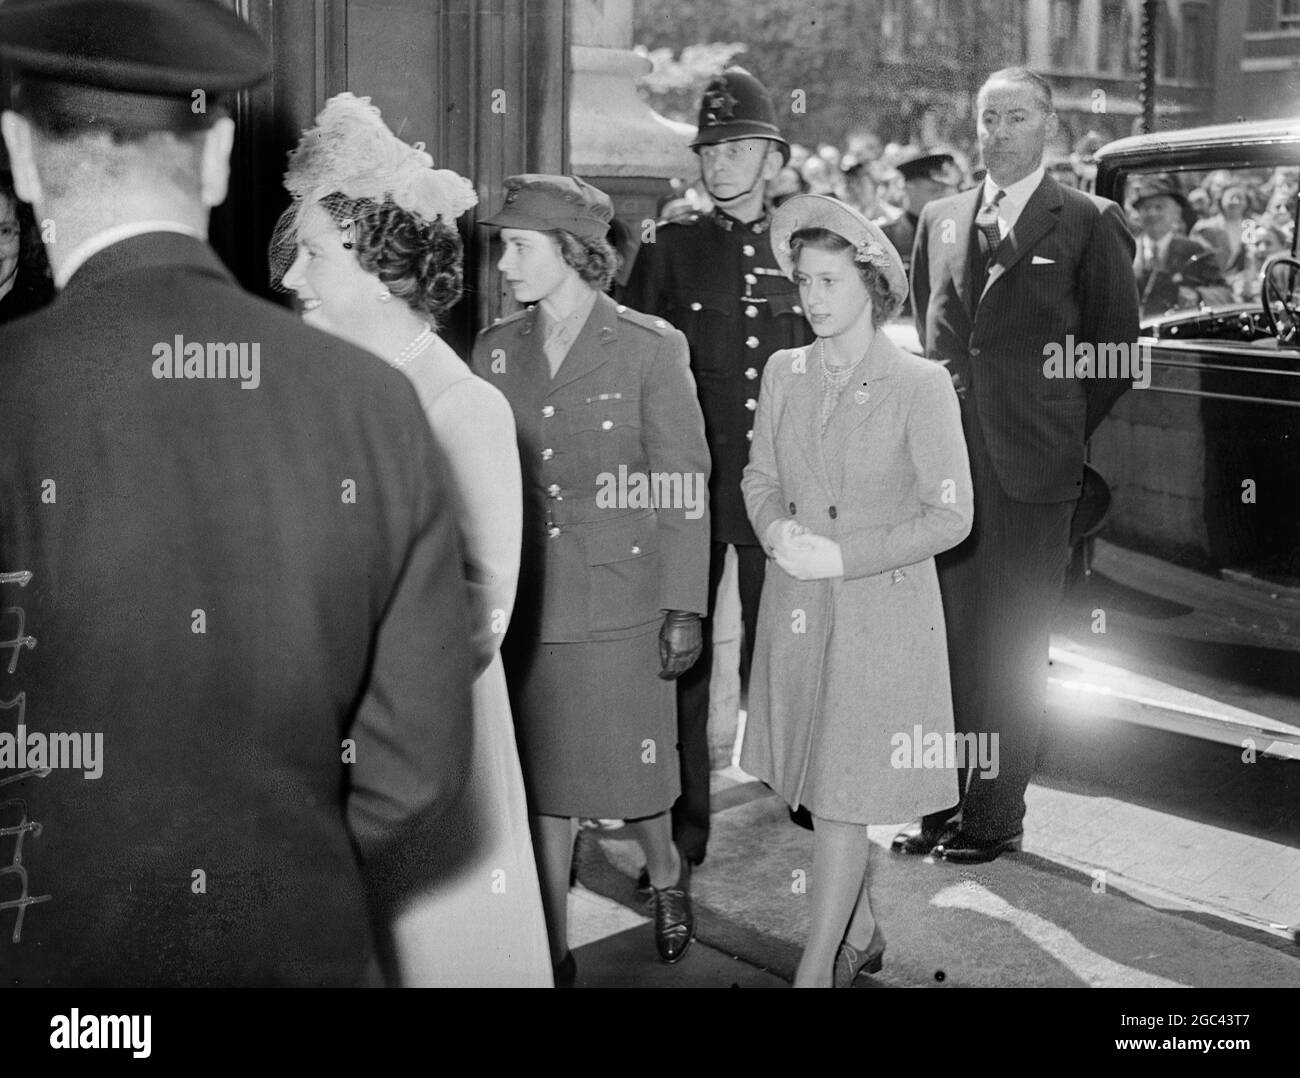 HM KING George VI AND QUEEN Elizabeth Accompanied by the two Princesses , Princess Elizabeth in uniform and Princess Margaret arriving at Houses of Parliament. 17 May 1945 Stock Photo